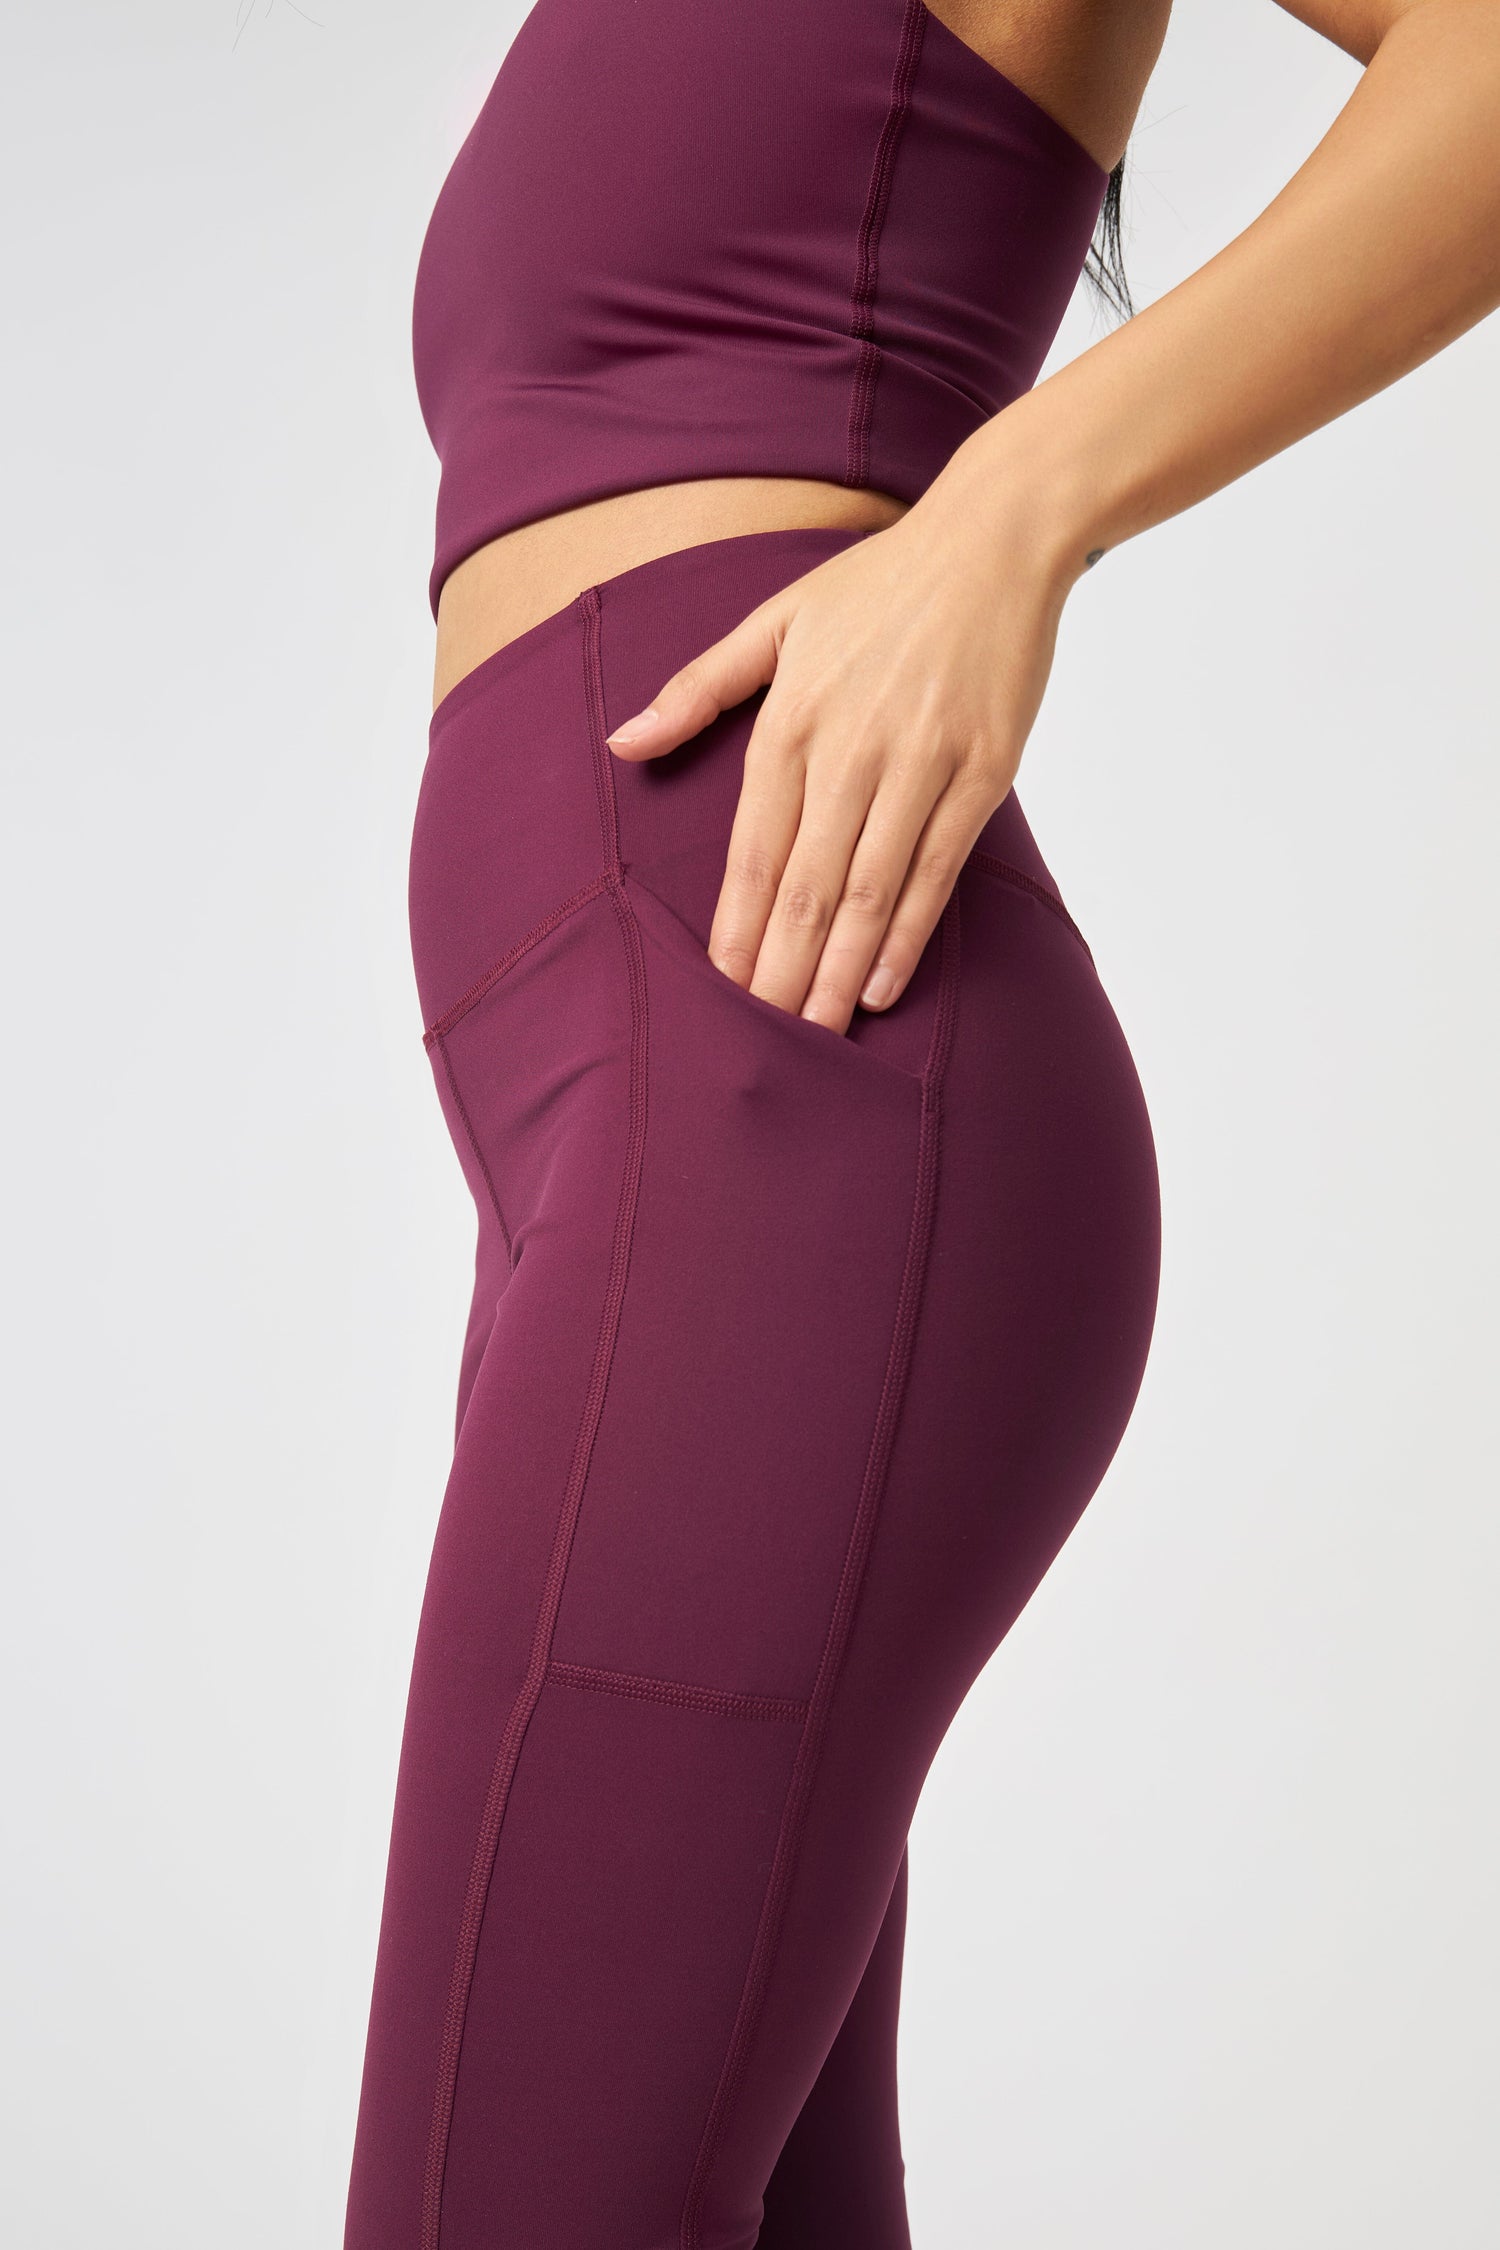 Girlfriend Collective W's High-Rise Pocket Legging - Made From Recycled Water Bottles Plum Pants